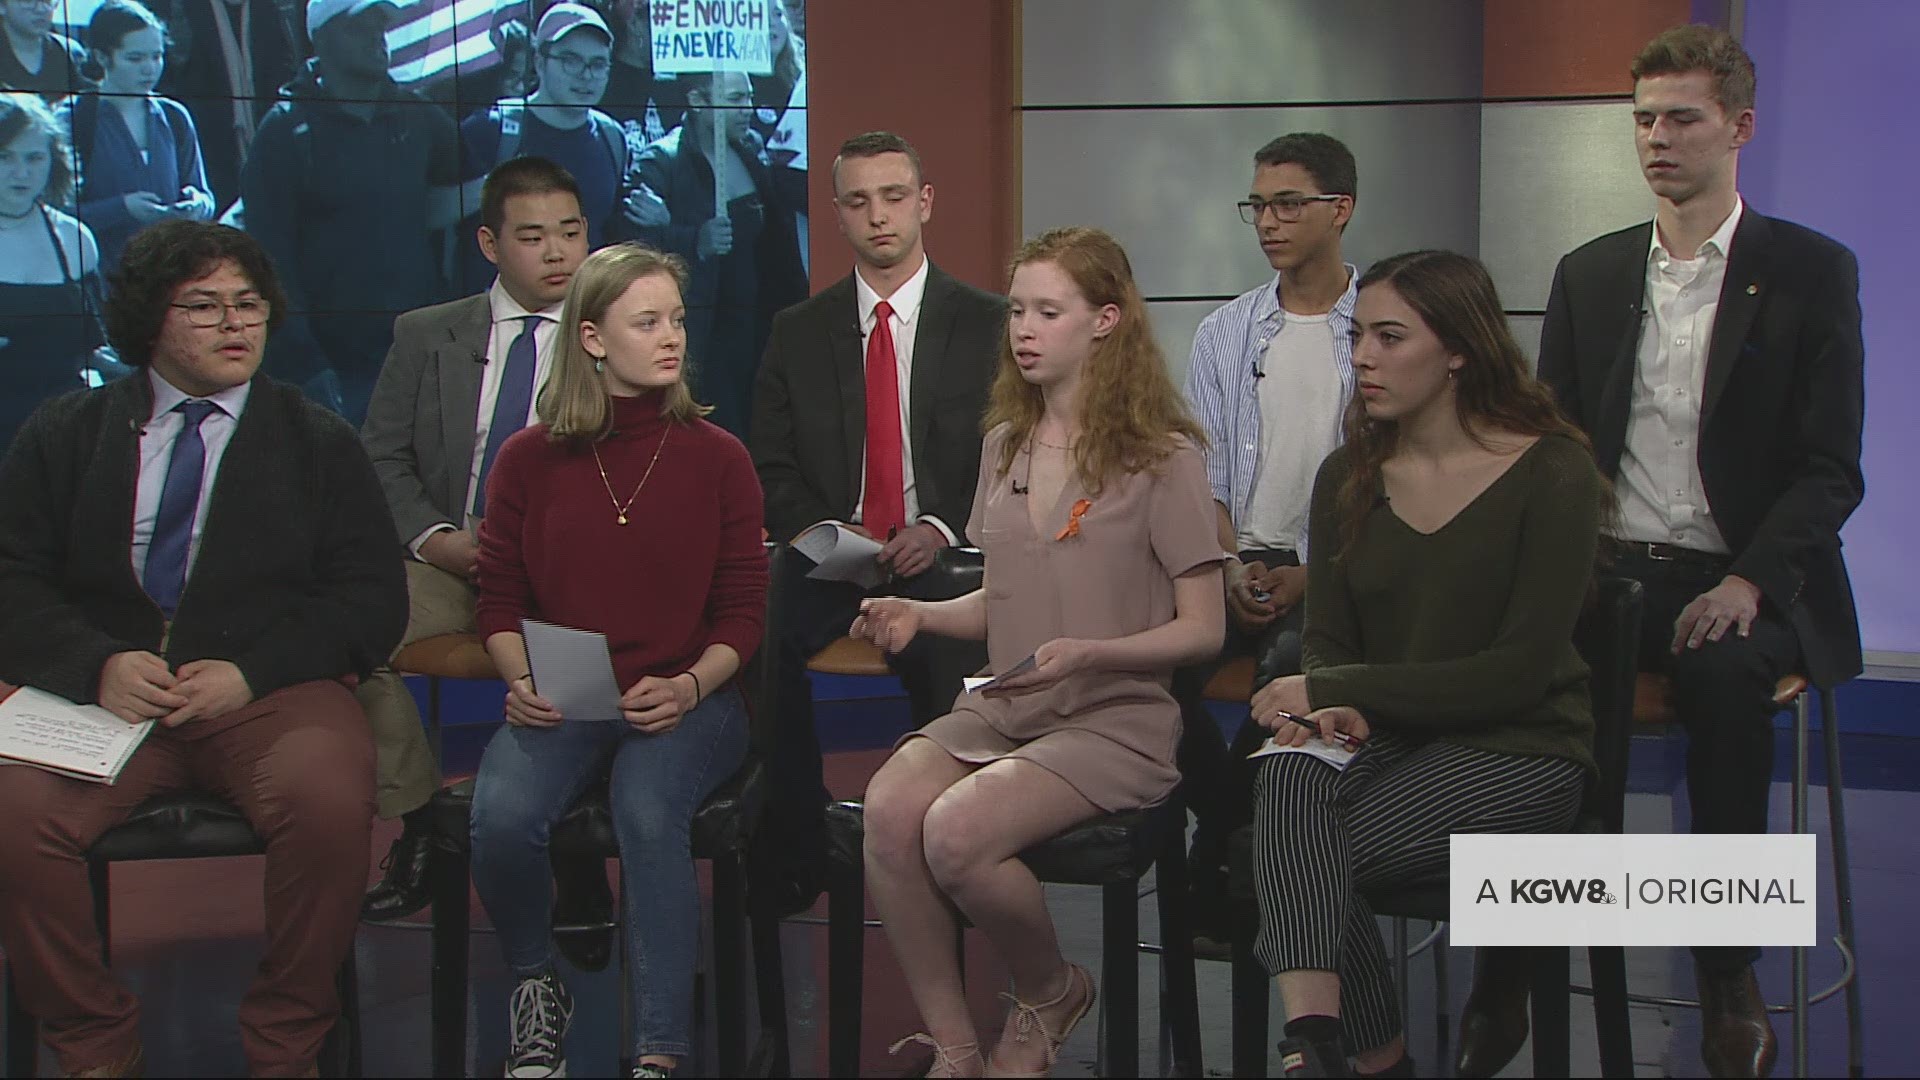 A panel of 8 students discuss why they feel the shooting in Parkland, Florida is a turning point in the decades-long gun debate. This is part of KGW's special Students Demand Action.